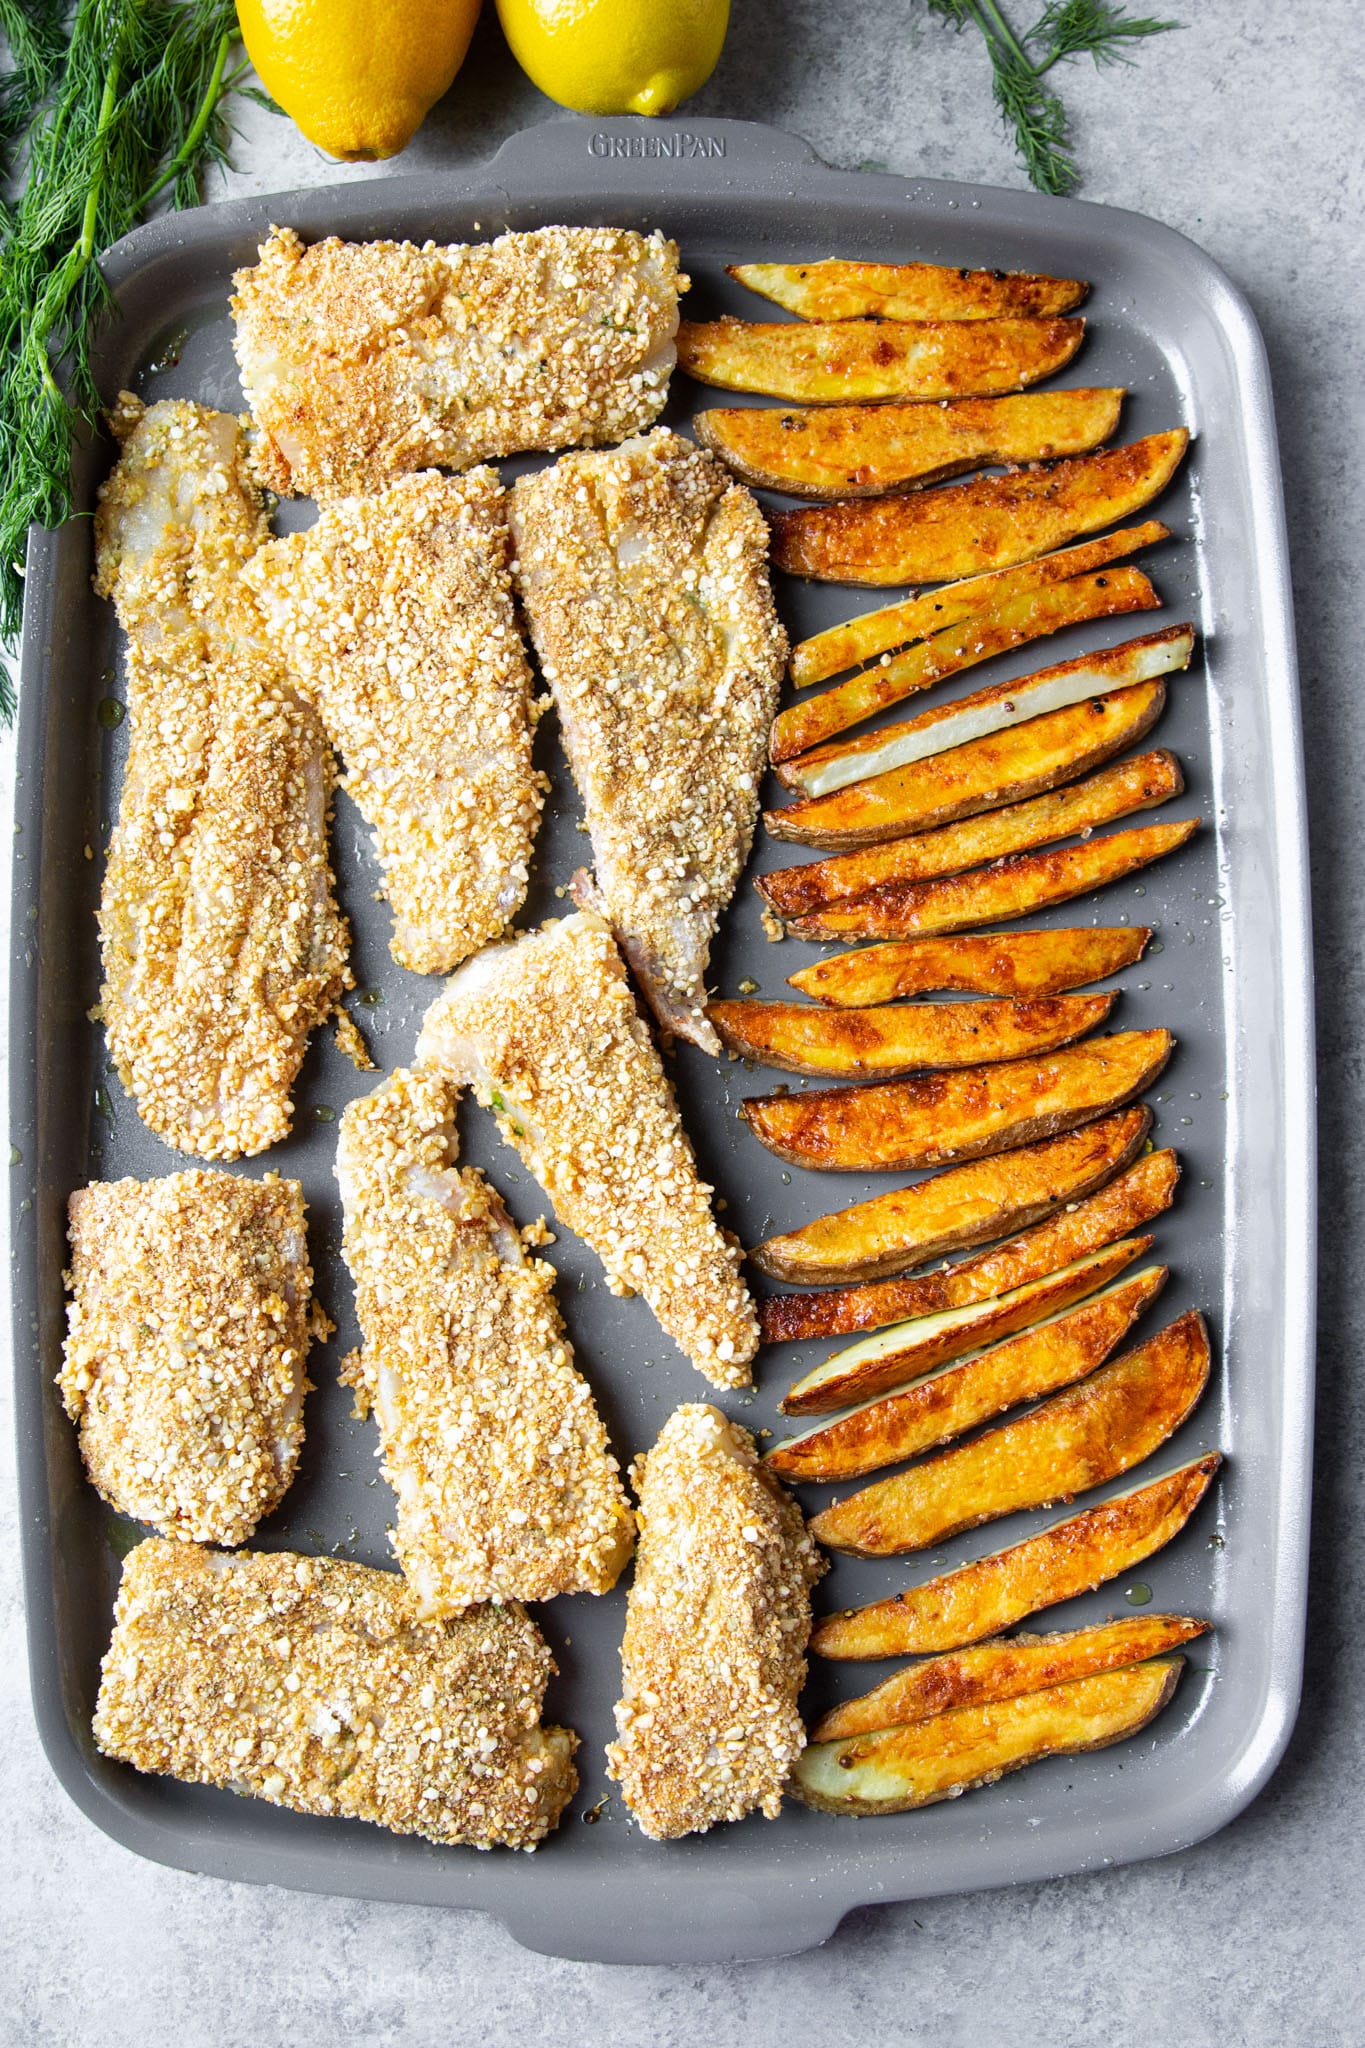 baked breaded fish filets and french fries on a metal baking sheet.